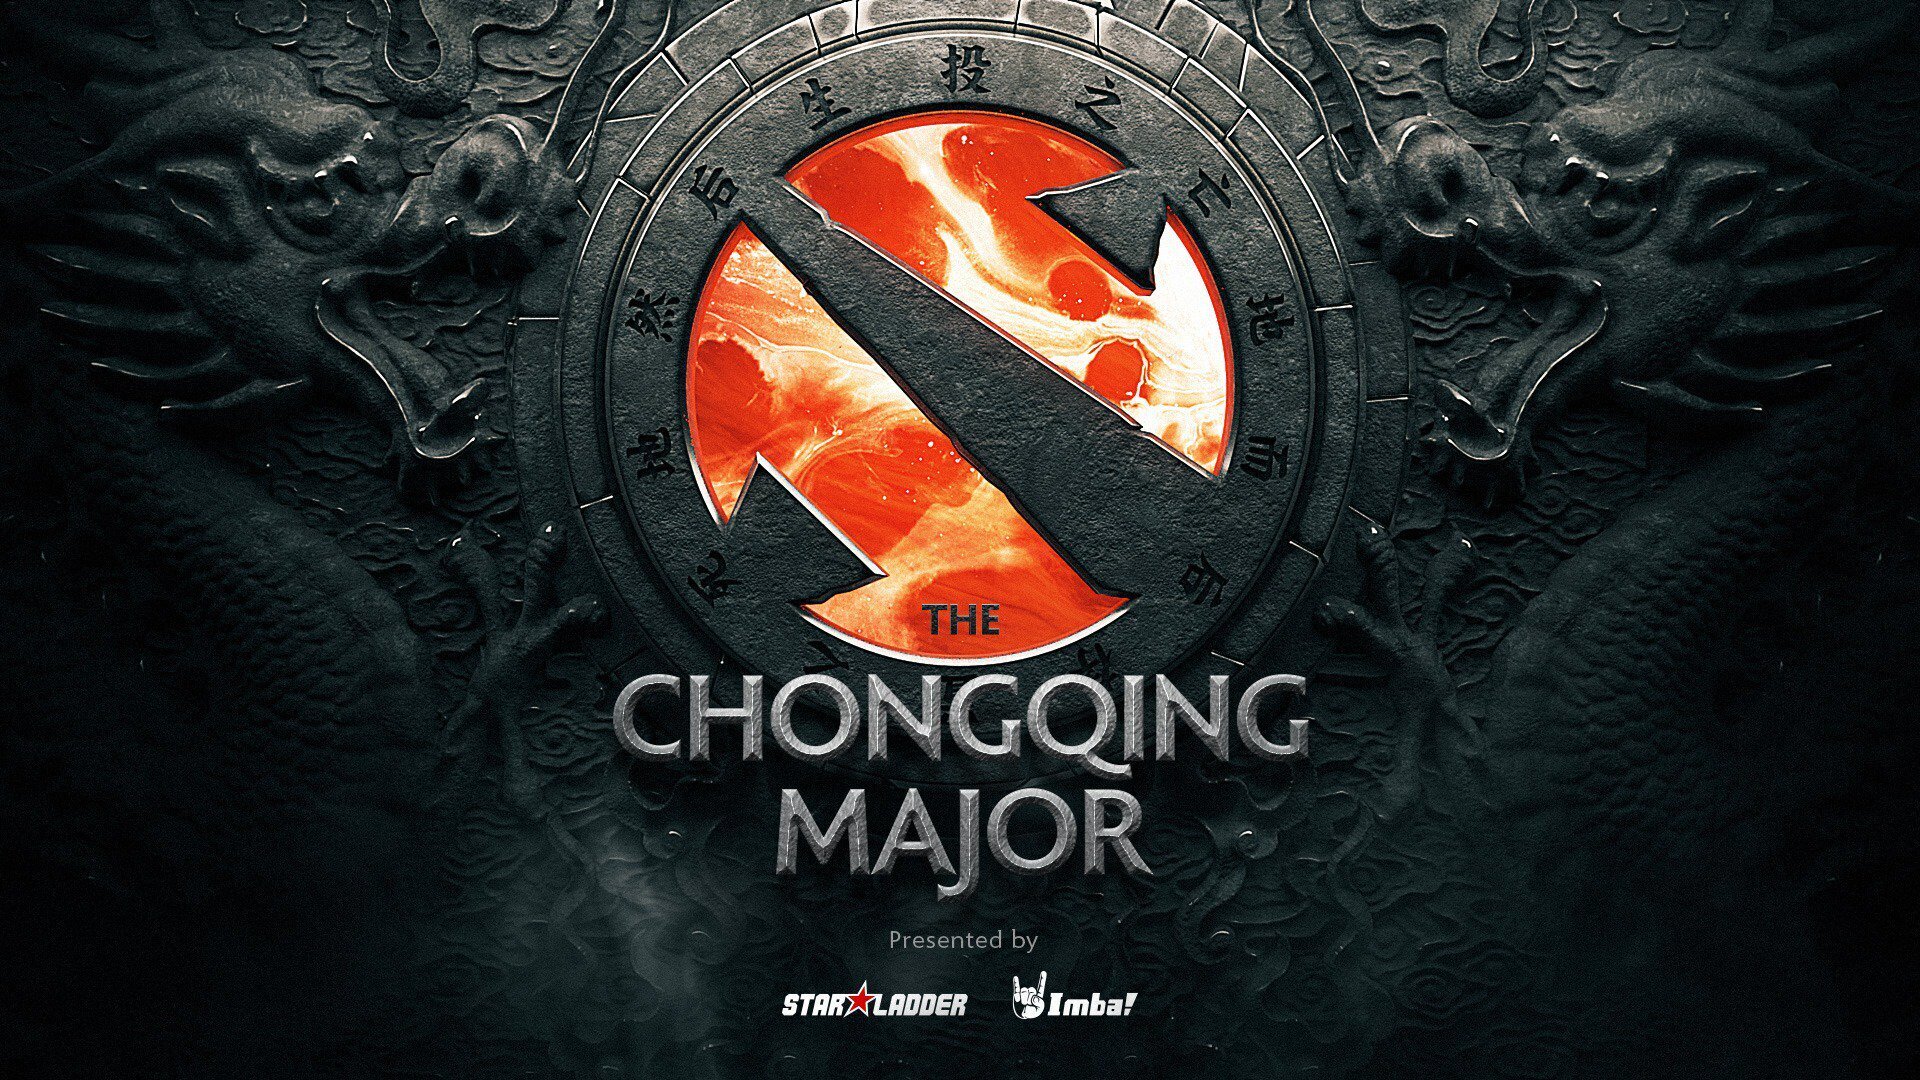 StarLadder announced that in cooperation with ImbaTV, they will host the second Dota 2 Pro Circuit (DPC) Major, to be called the Chongqing Major.